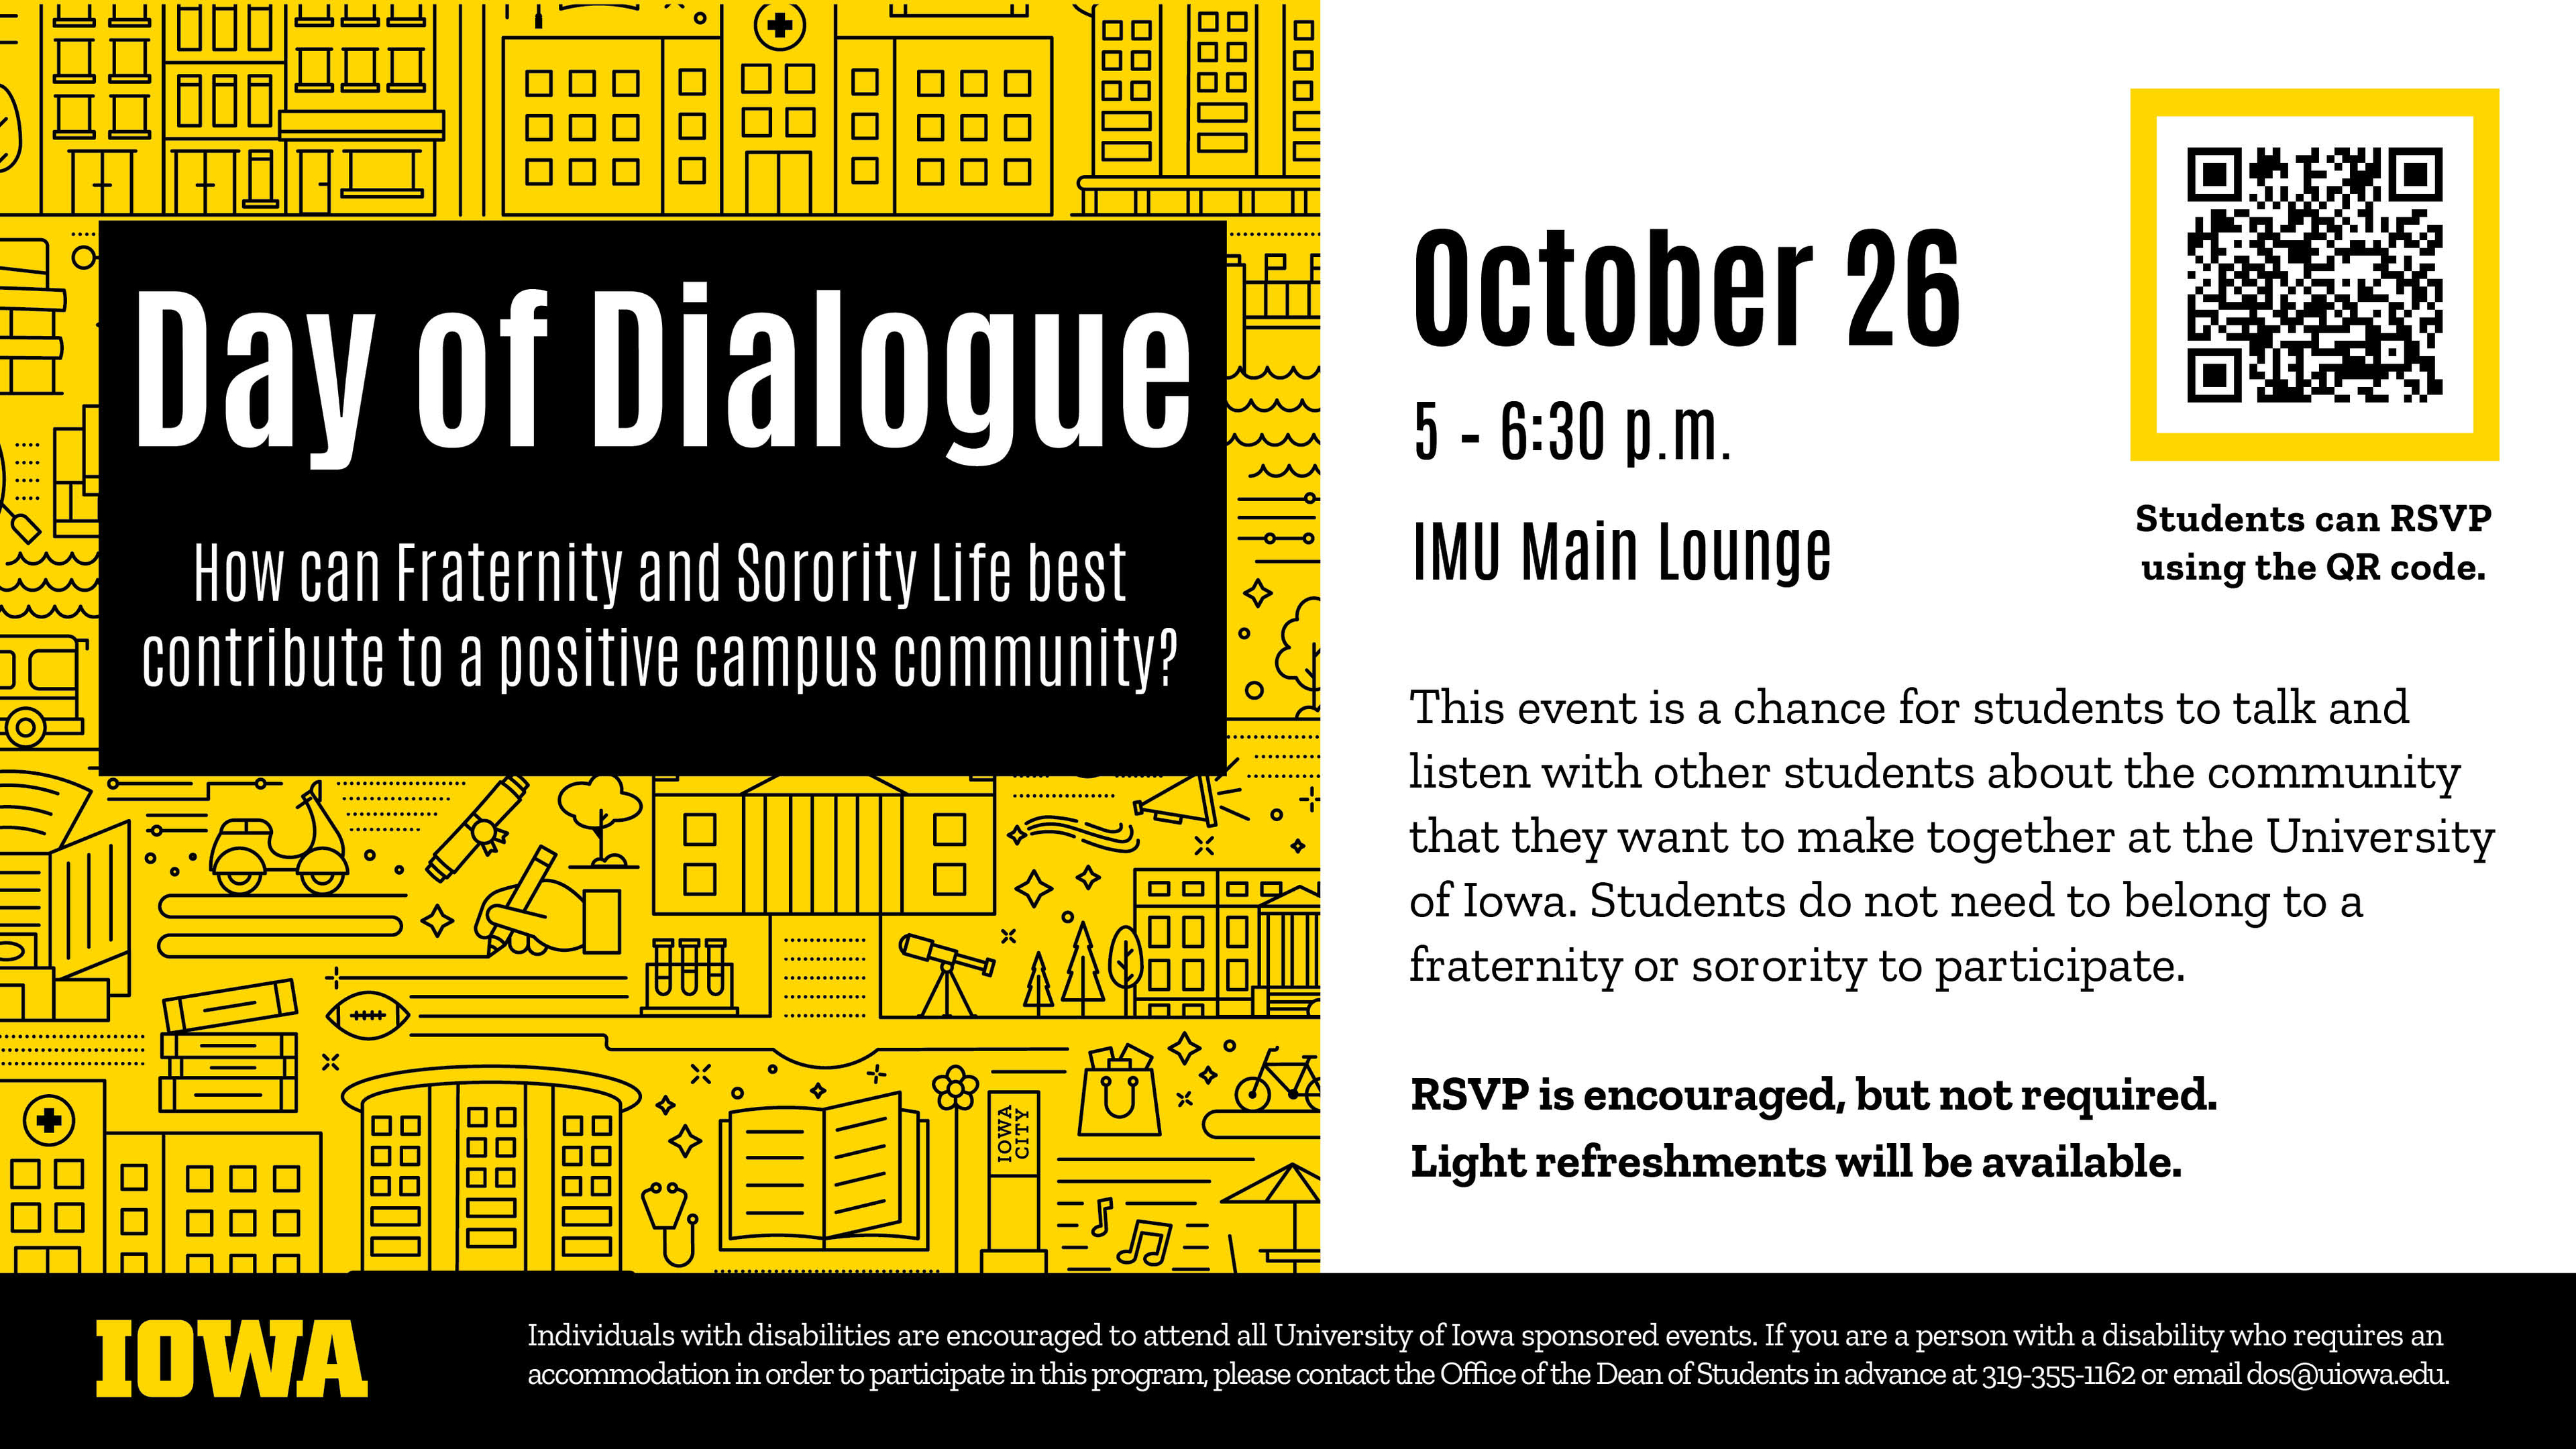 Day of Dialogue October 26 5-6:30 p.m.